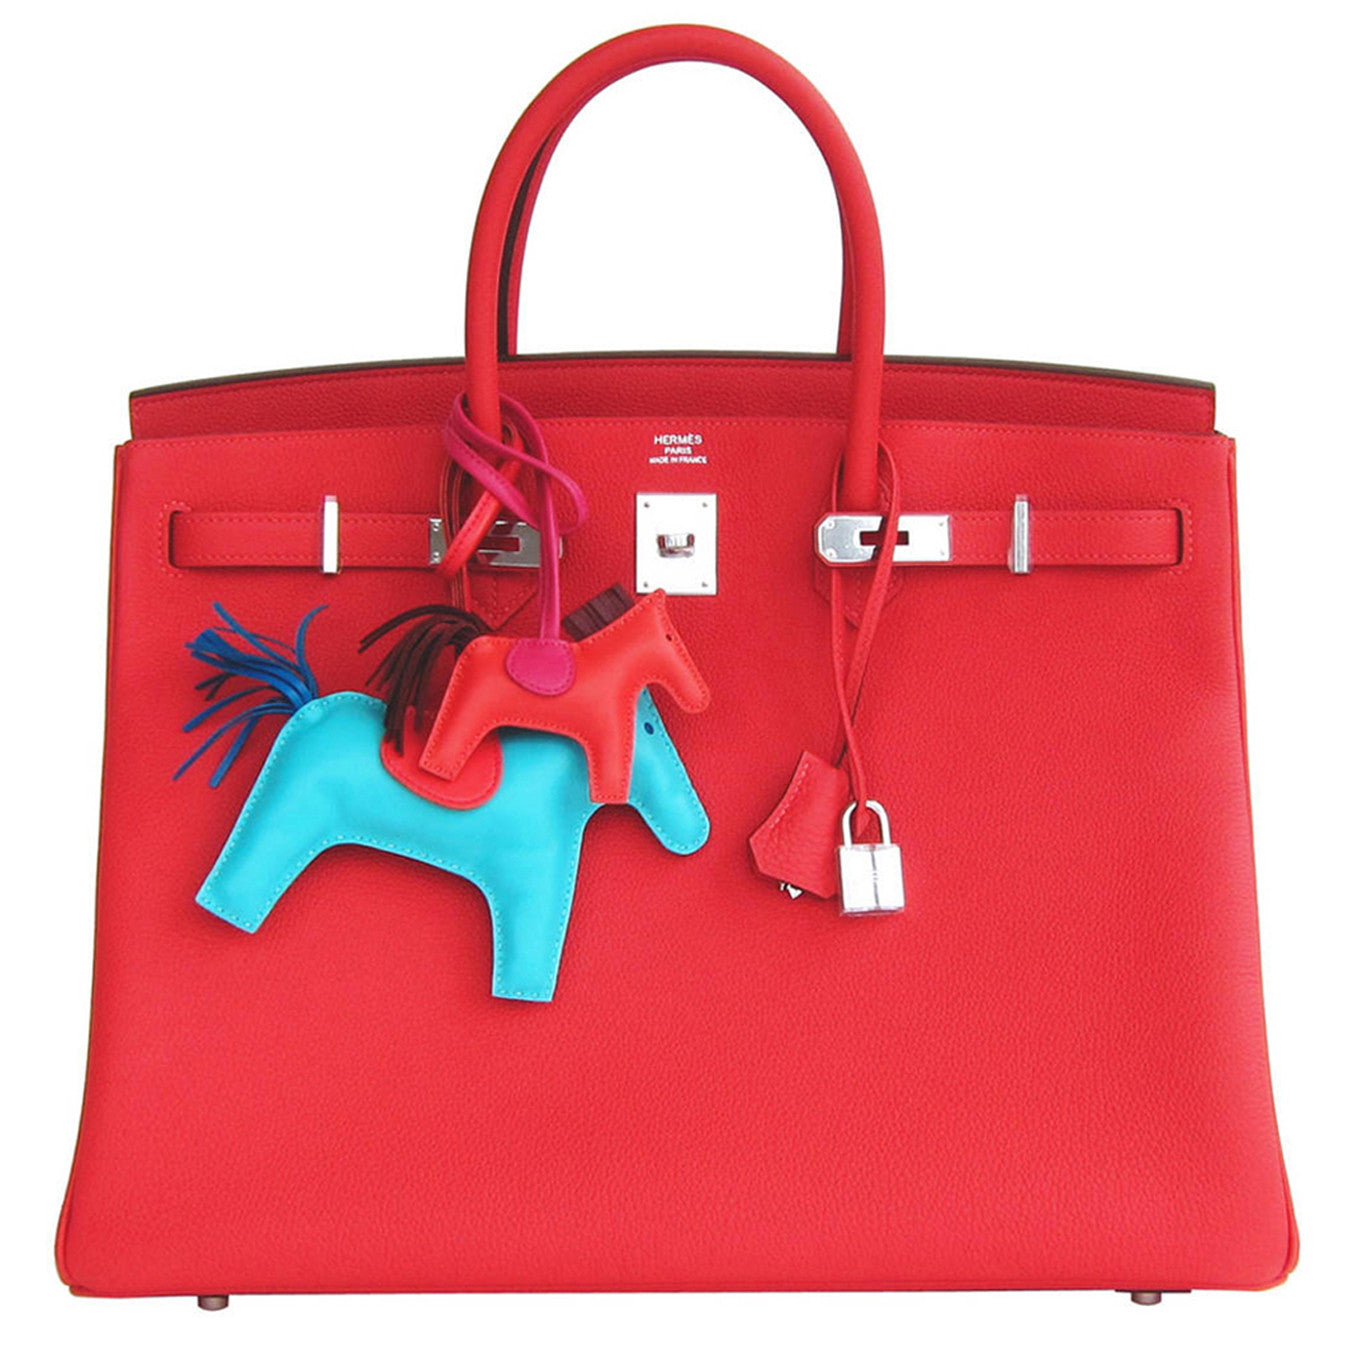 HERMES RODEO: EVERYTHING YOU NEED TO KNOW, STYLING ON BIRKIN AND KELLY